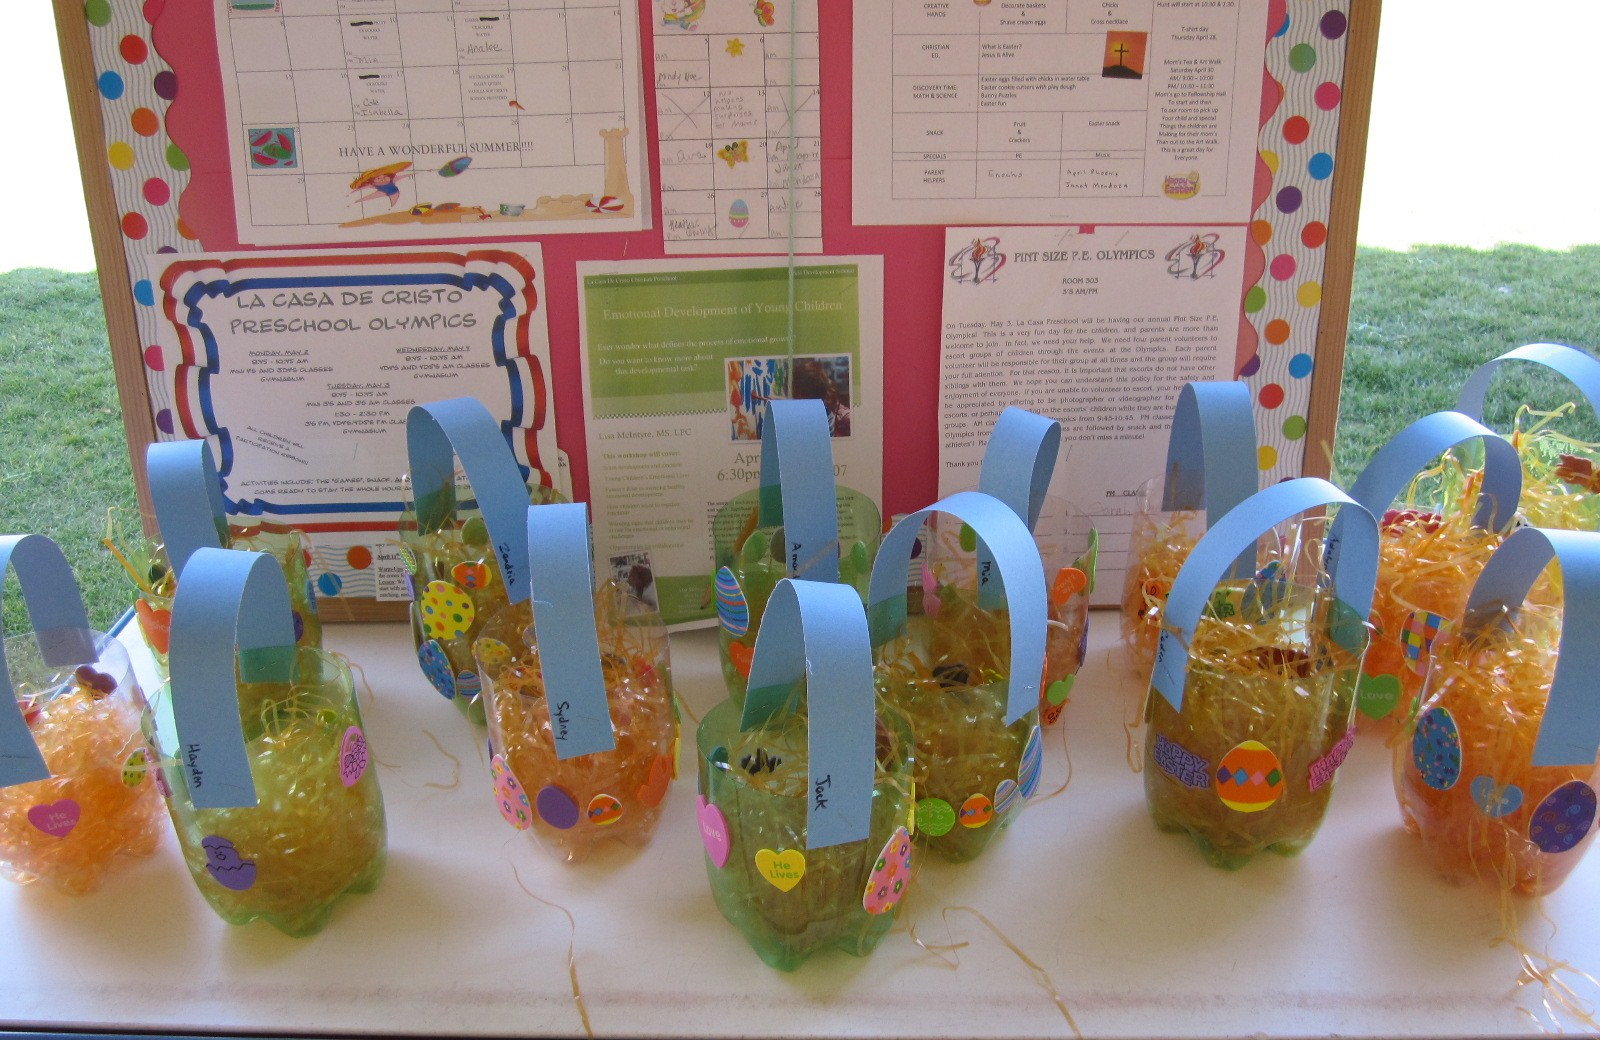 Easter Party Ideas For Preschool
 Keeping Up With Sydney Preschool Easter Party